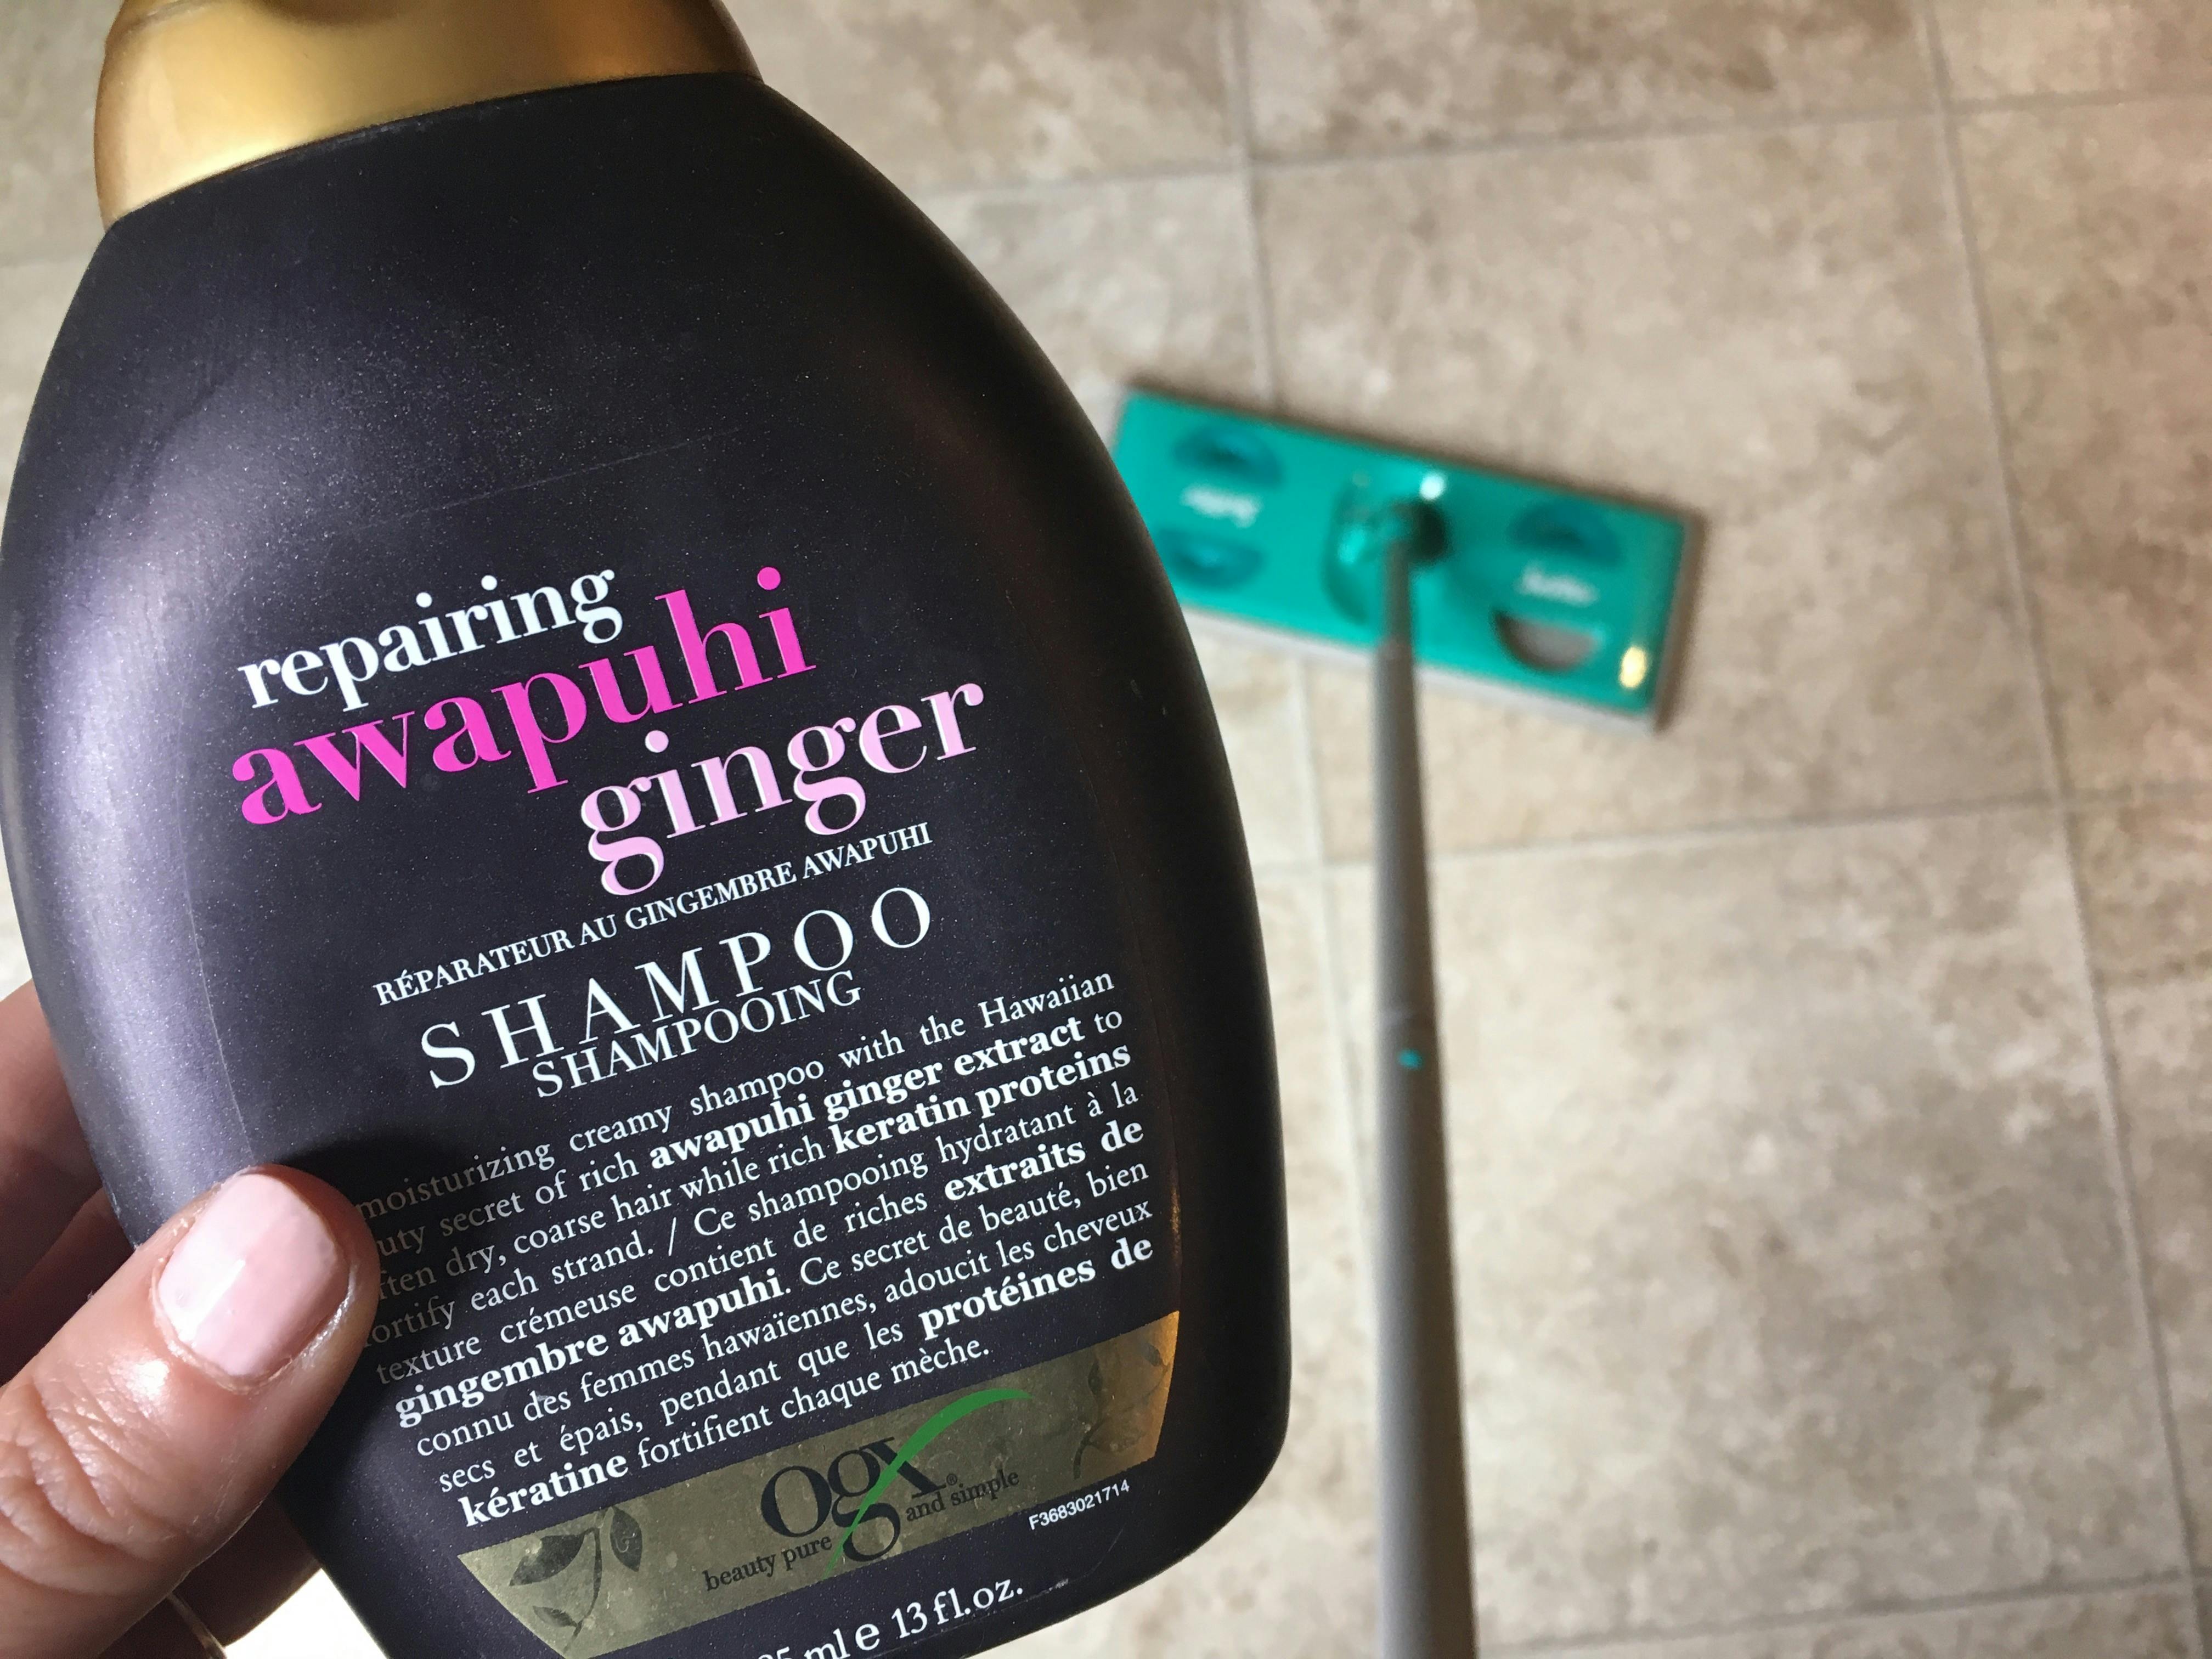 16 Ingenious Uses For Shampoo Will Shock You - The Krazy Coupon Lady